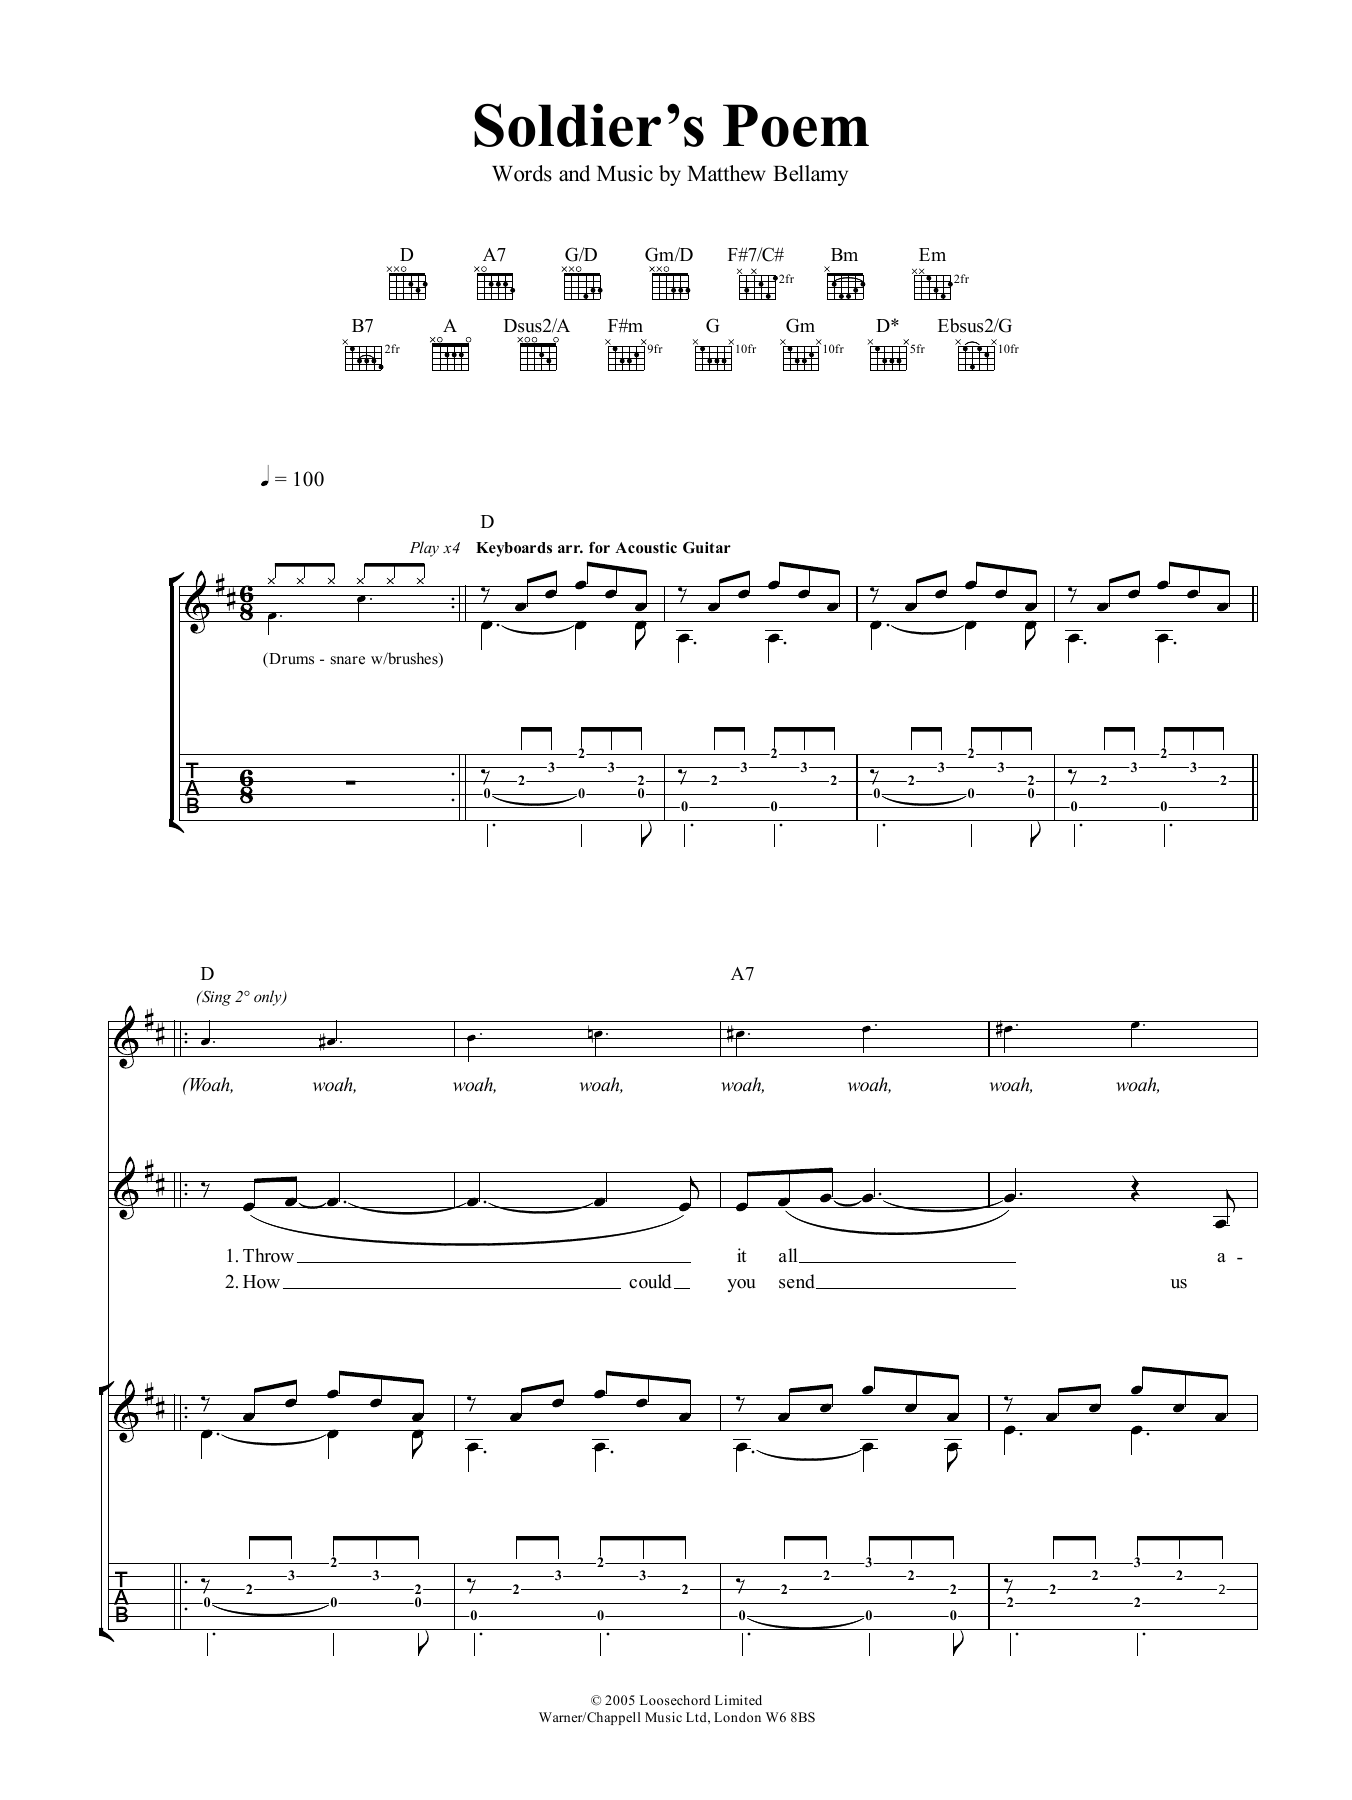 Download Muse Soldier's Poem Sheet Music